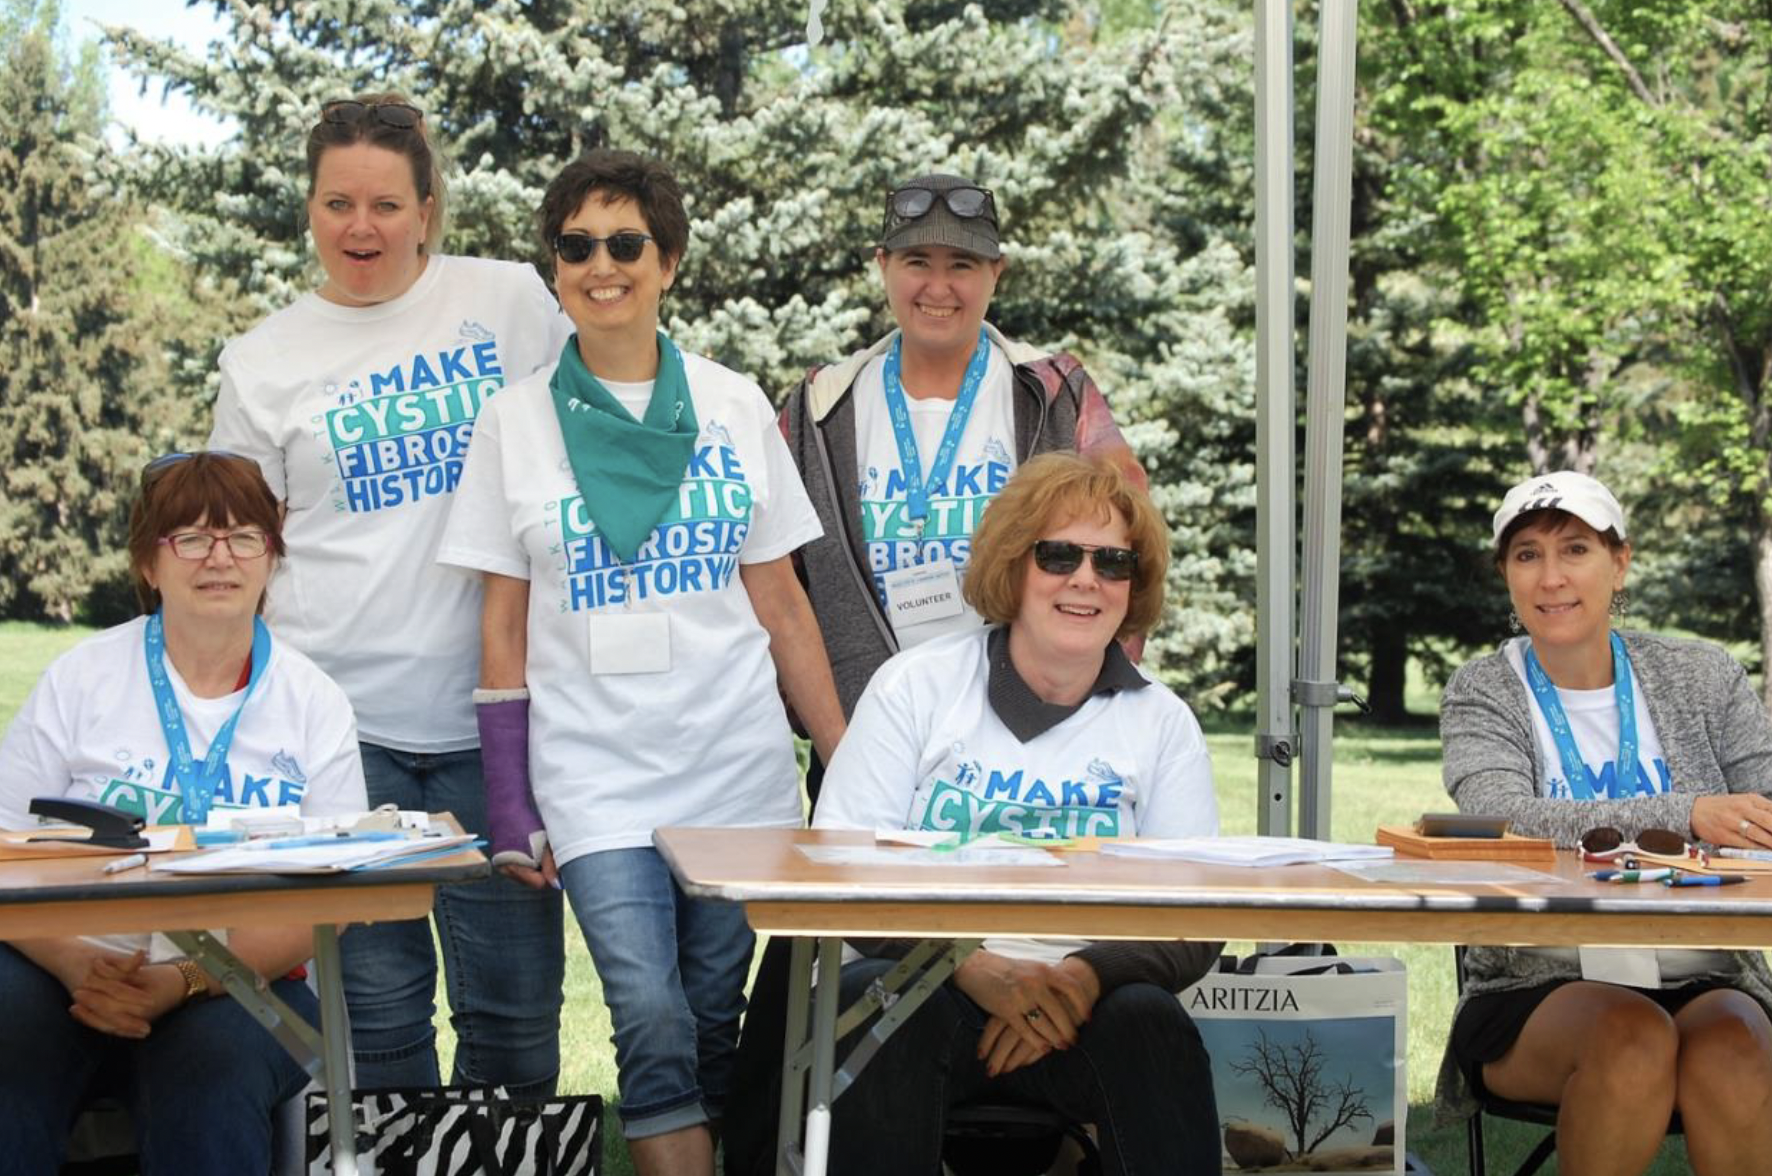 A group of volunteers at the Walk to Make Cystic Fibrosis History